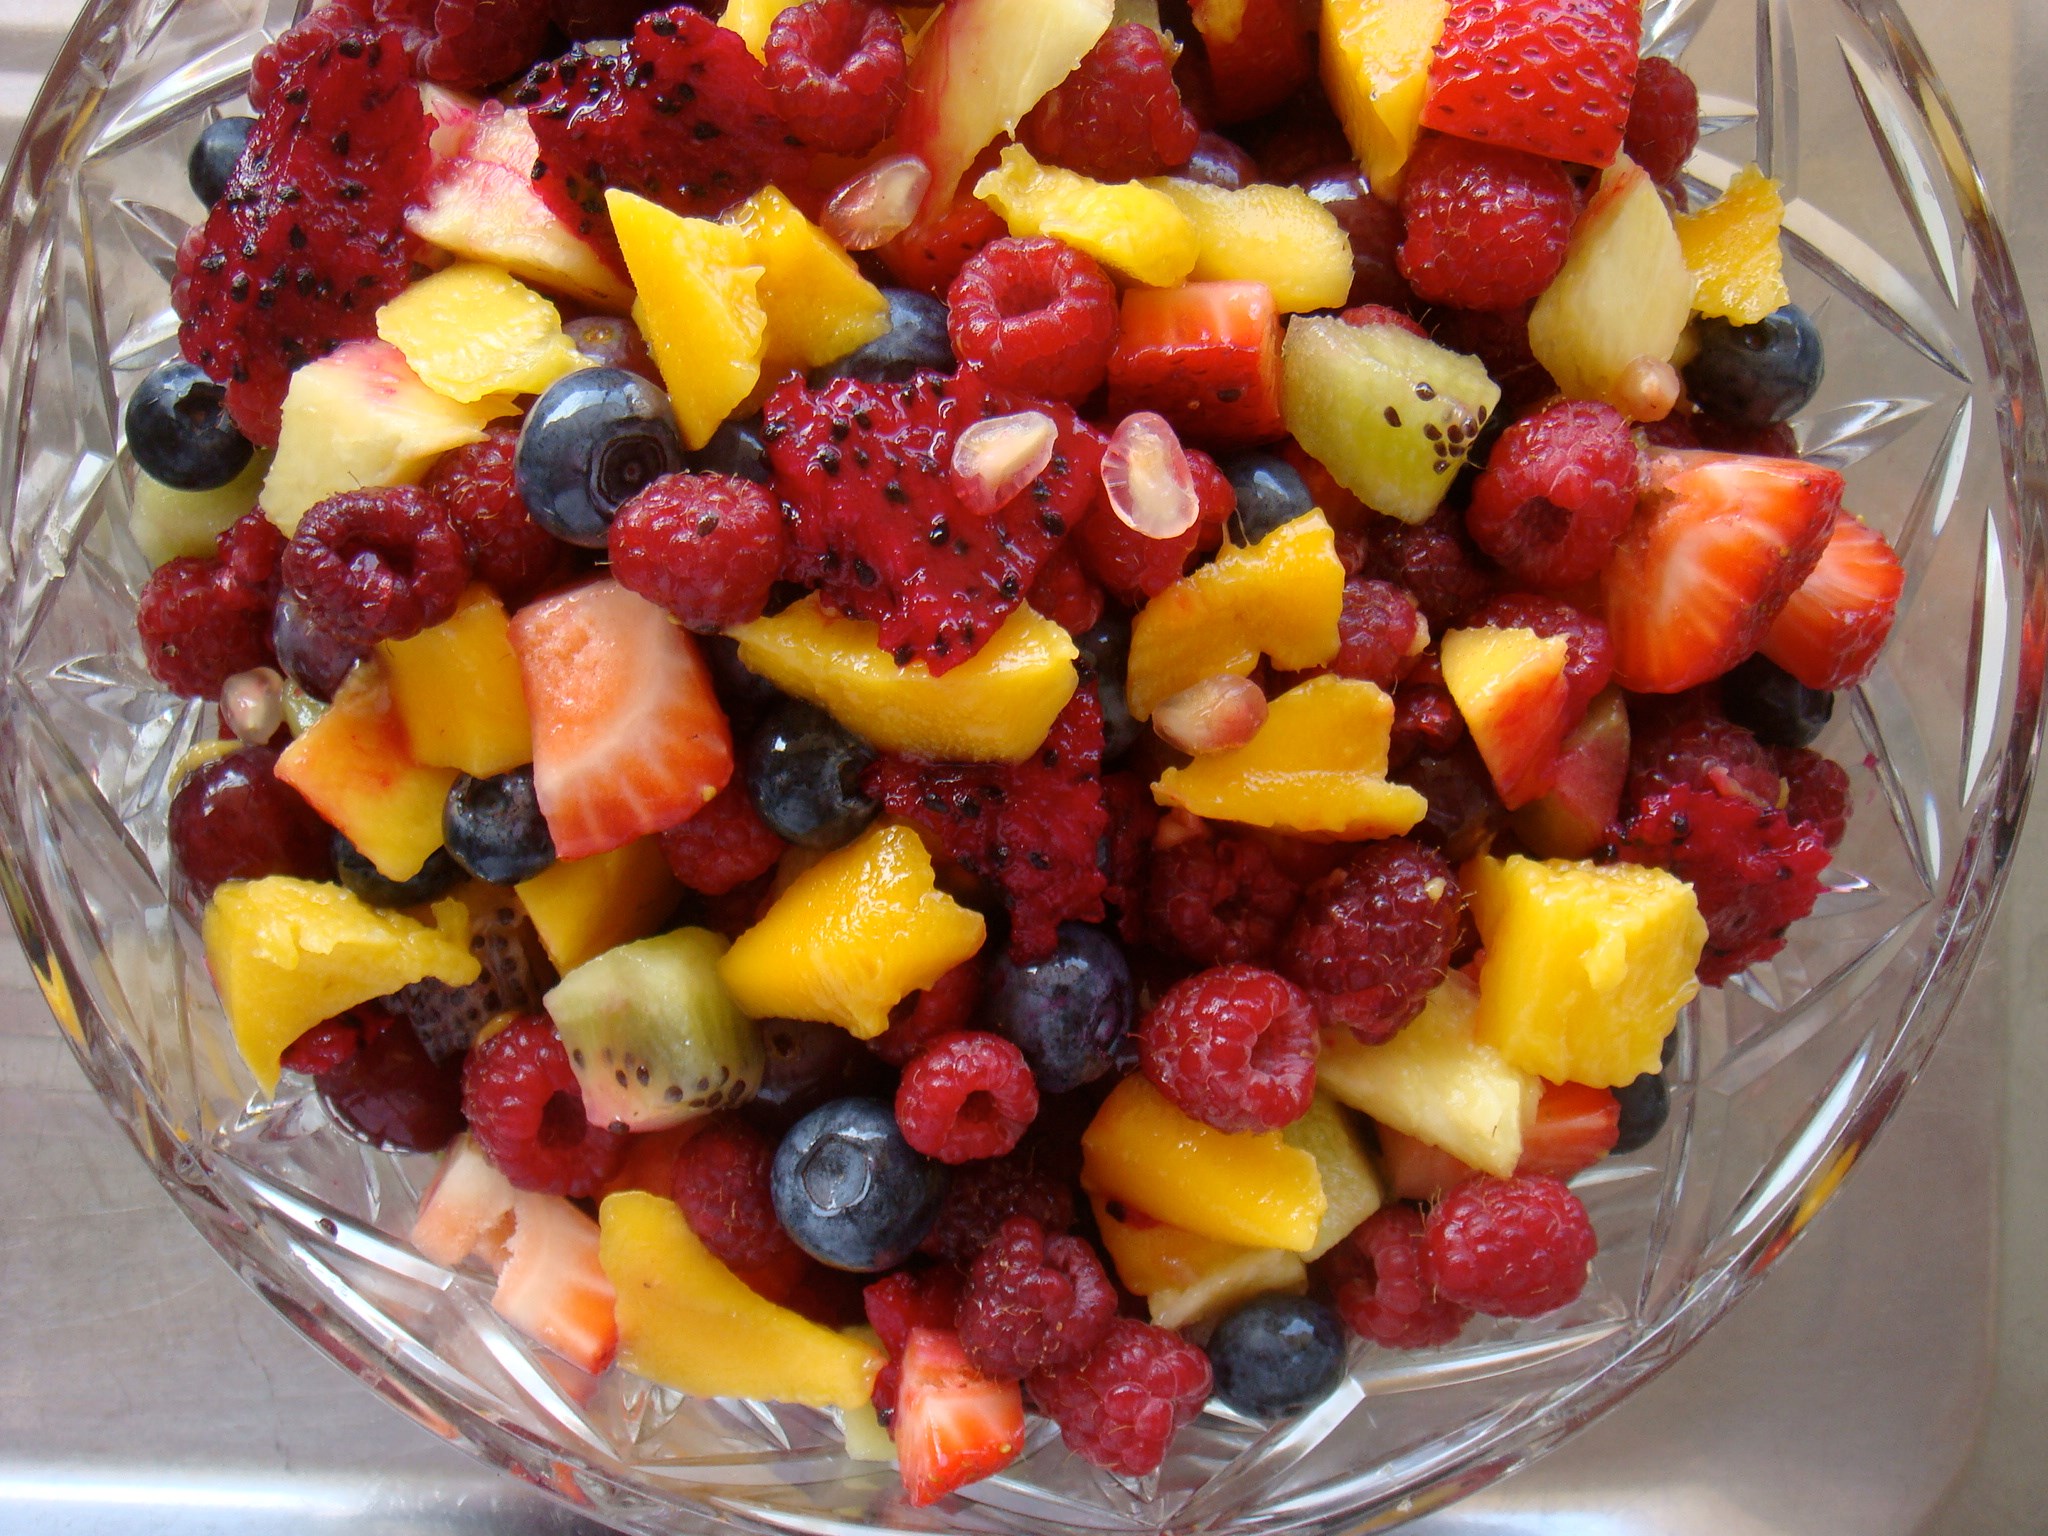 Fruit Hd Wallpapers 1080p High Quality - 1080p Fruit Salad , HD Wallpaper & Backgrounds